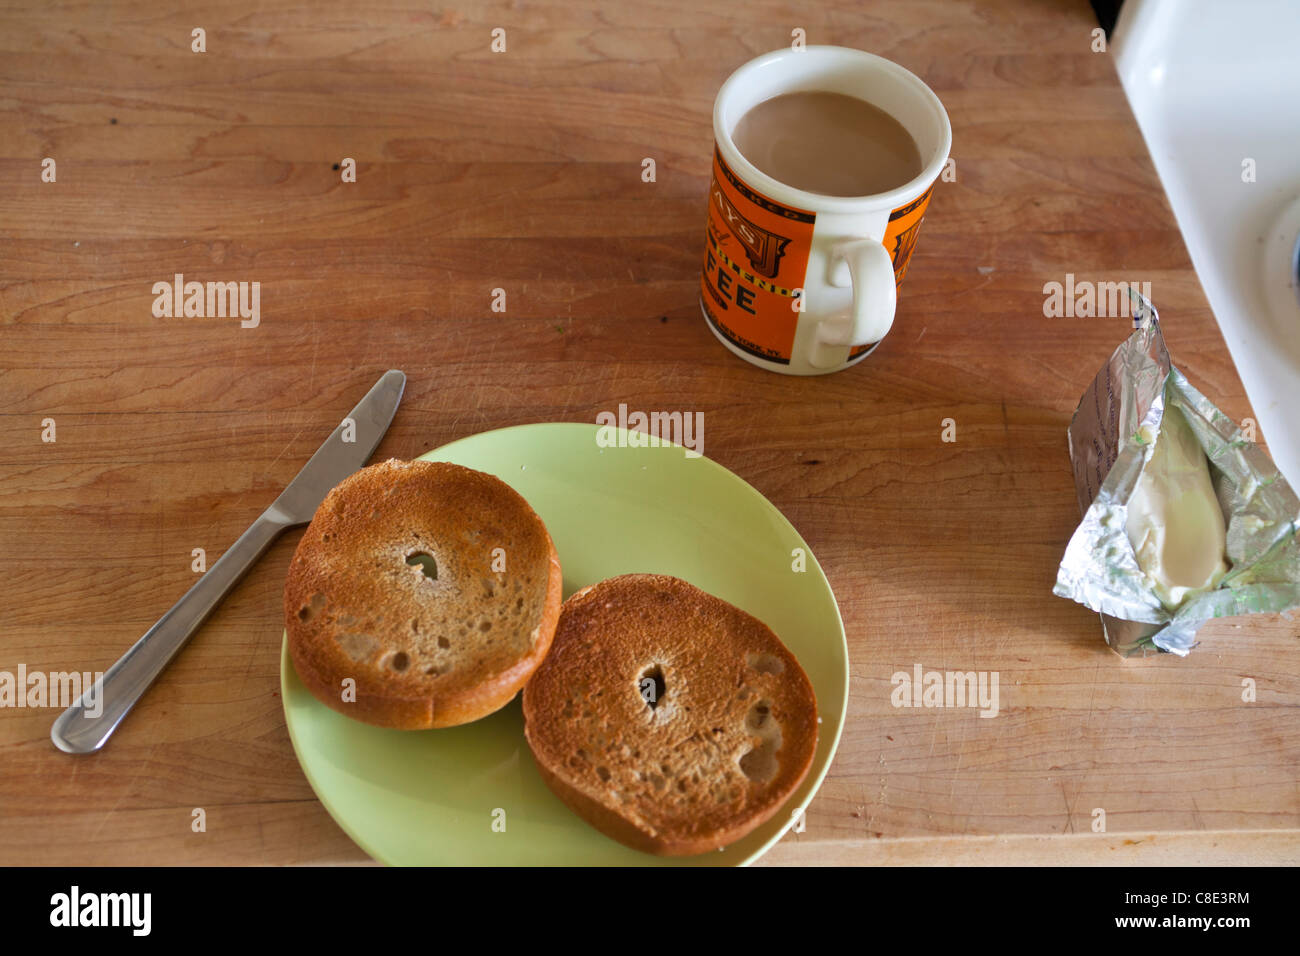 A bagel, cream cheese and coffee for breakfast Stock Photo